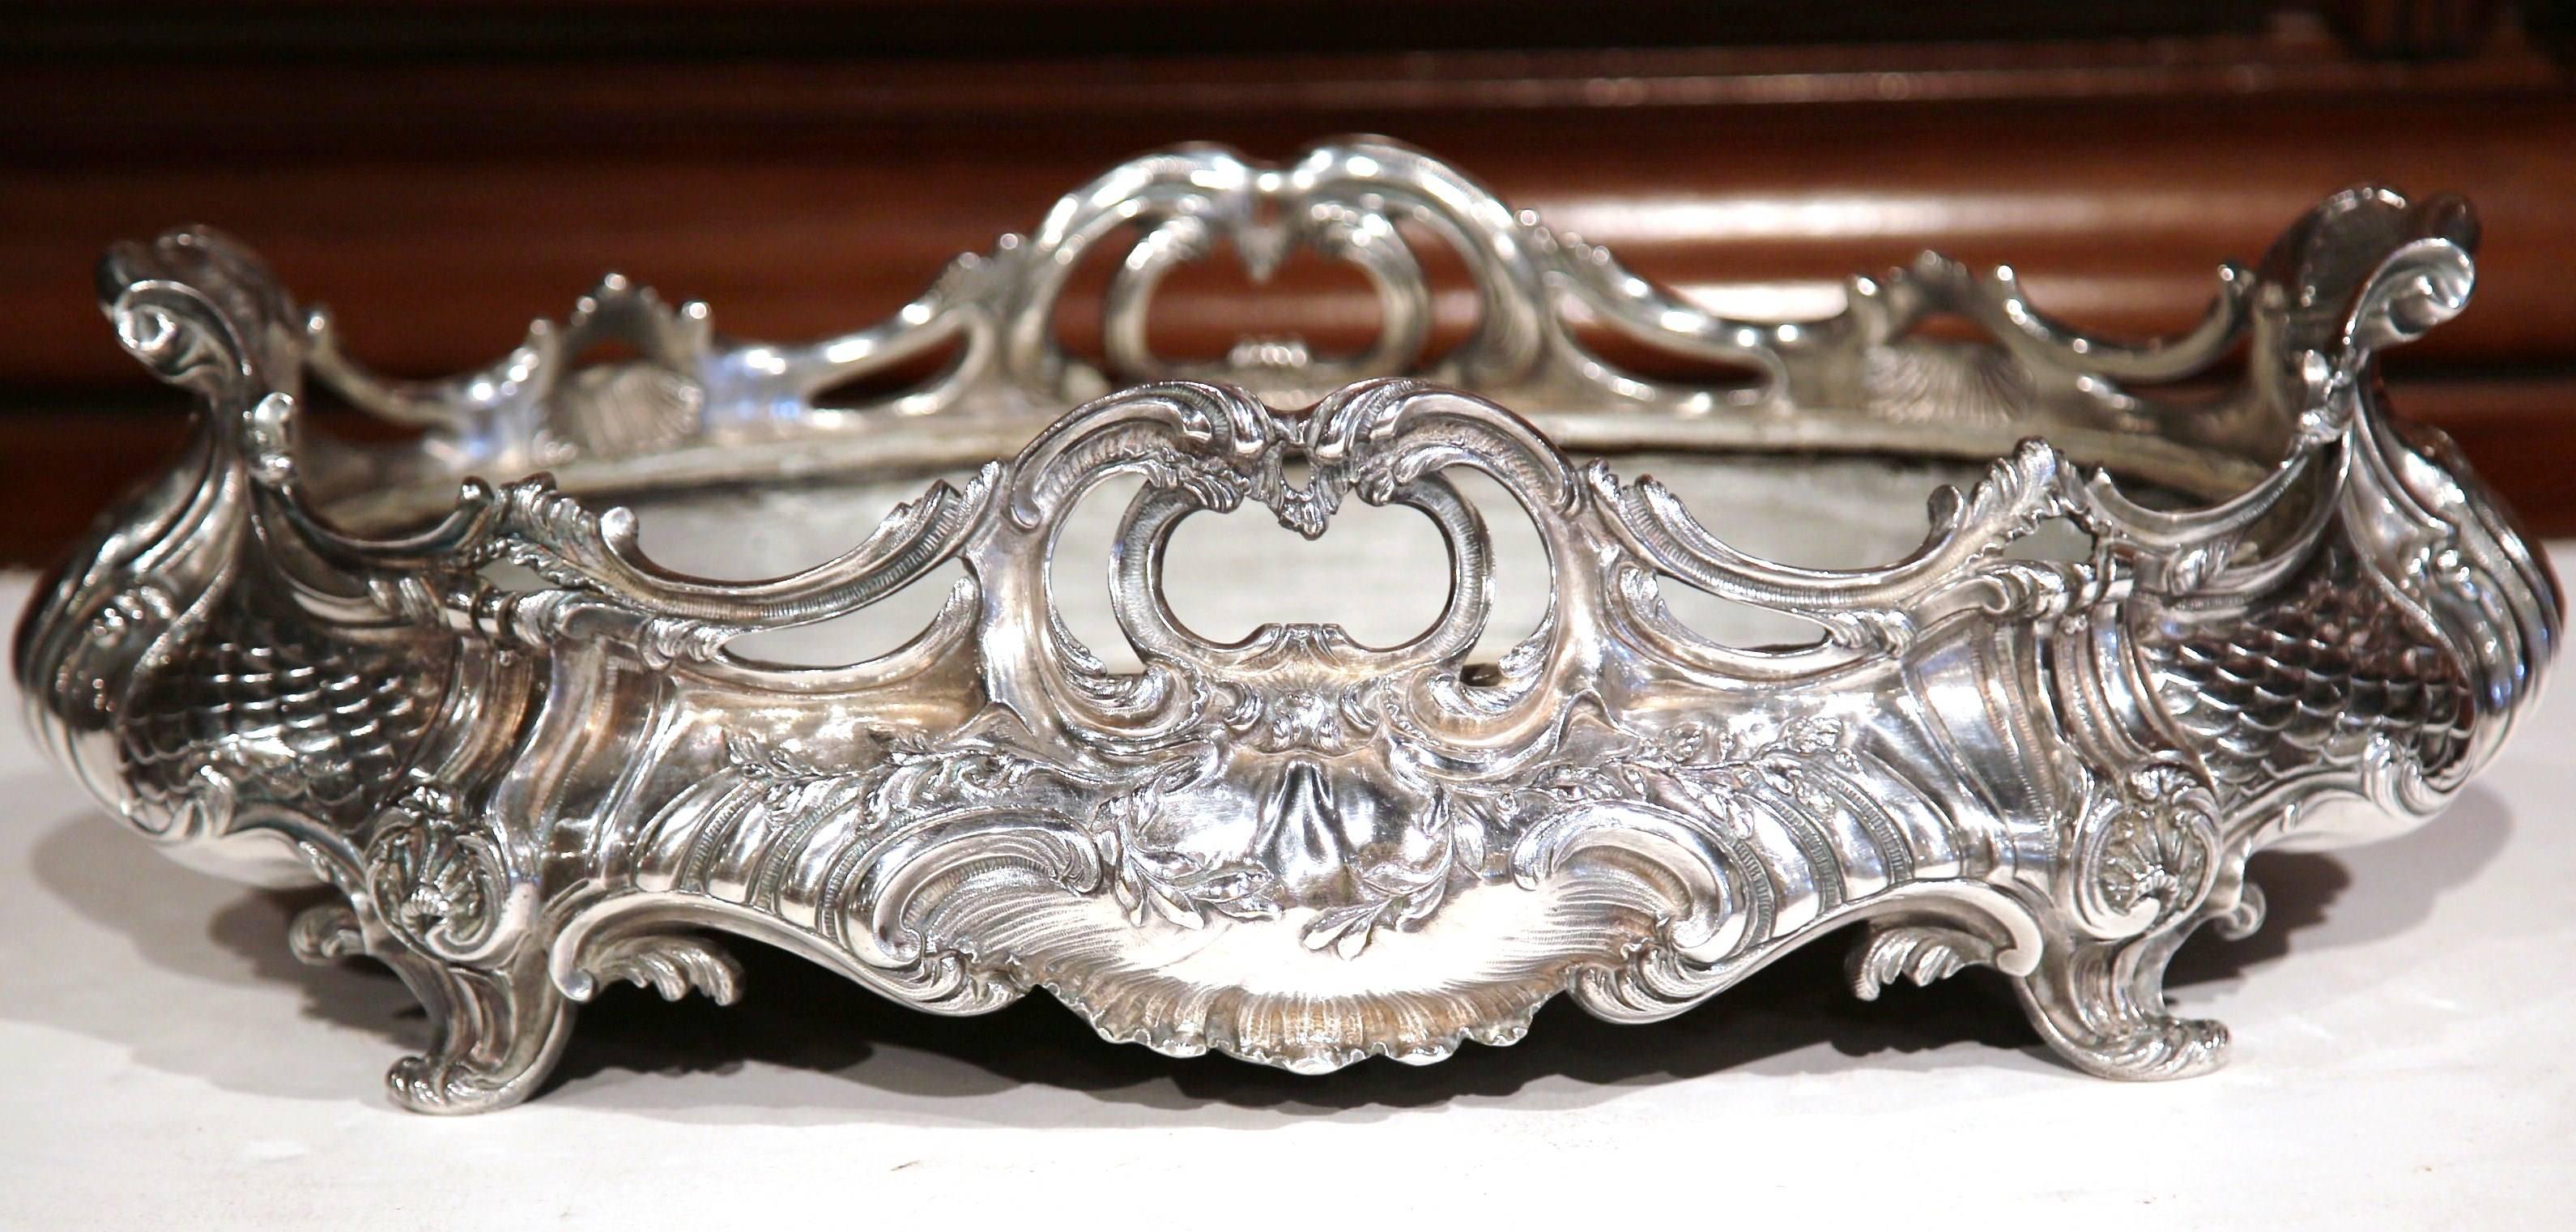 This elegant, silver plated jardinière was created in Paris, France, circa 1850. The large, antique planter sits on four small curved feet and has its original removable zinc liner. Oval in shape, the center piece has elaborate, sculpted motifs